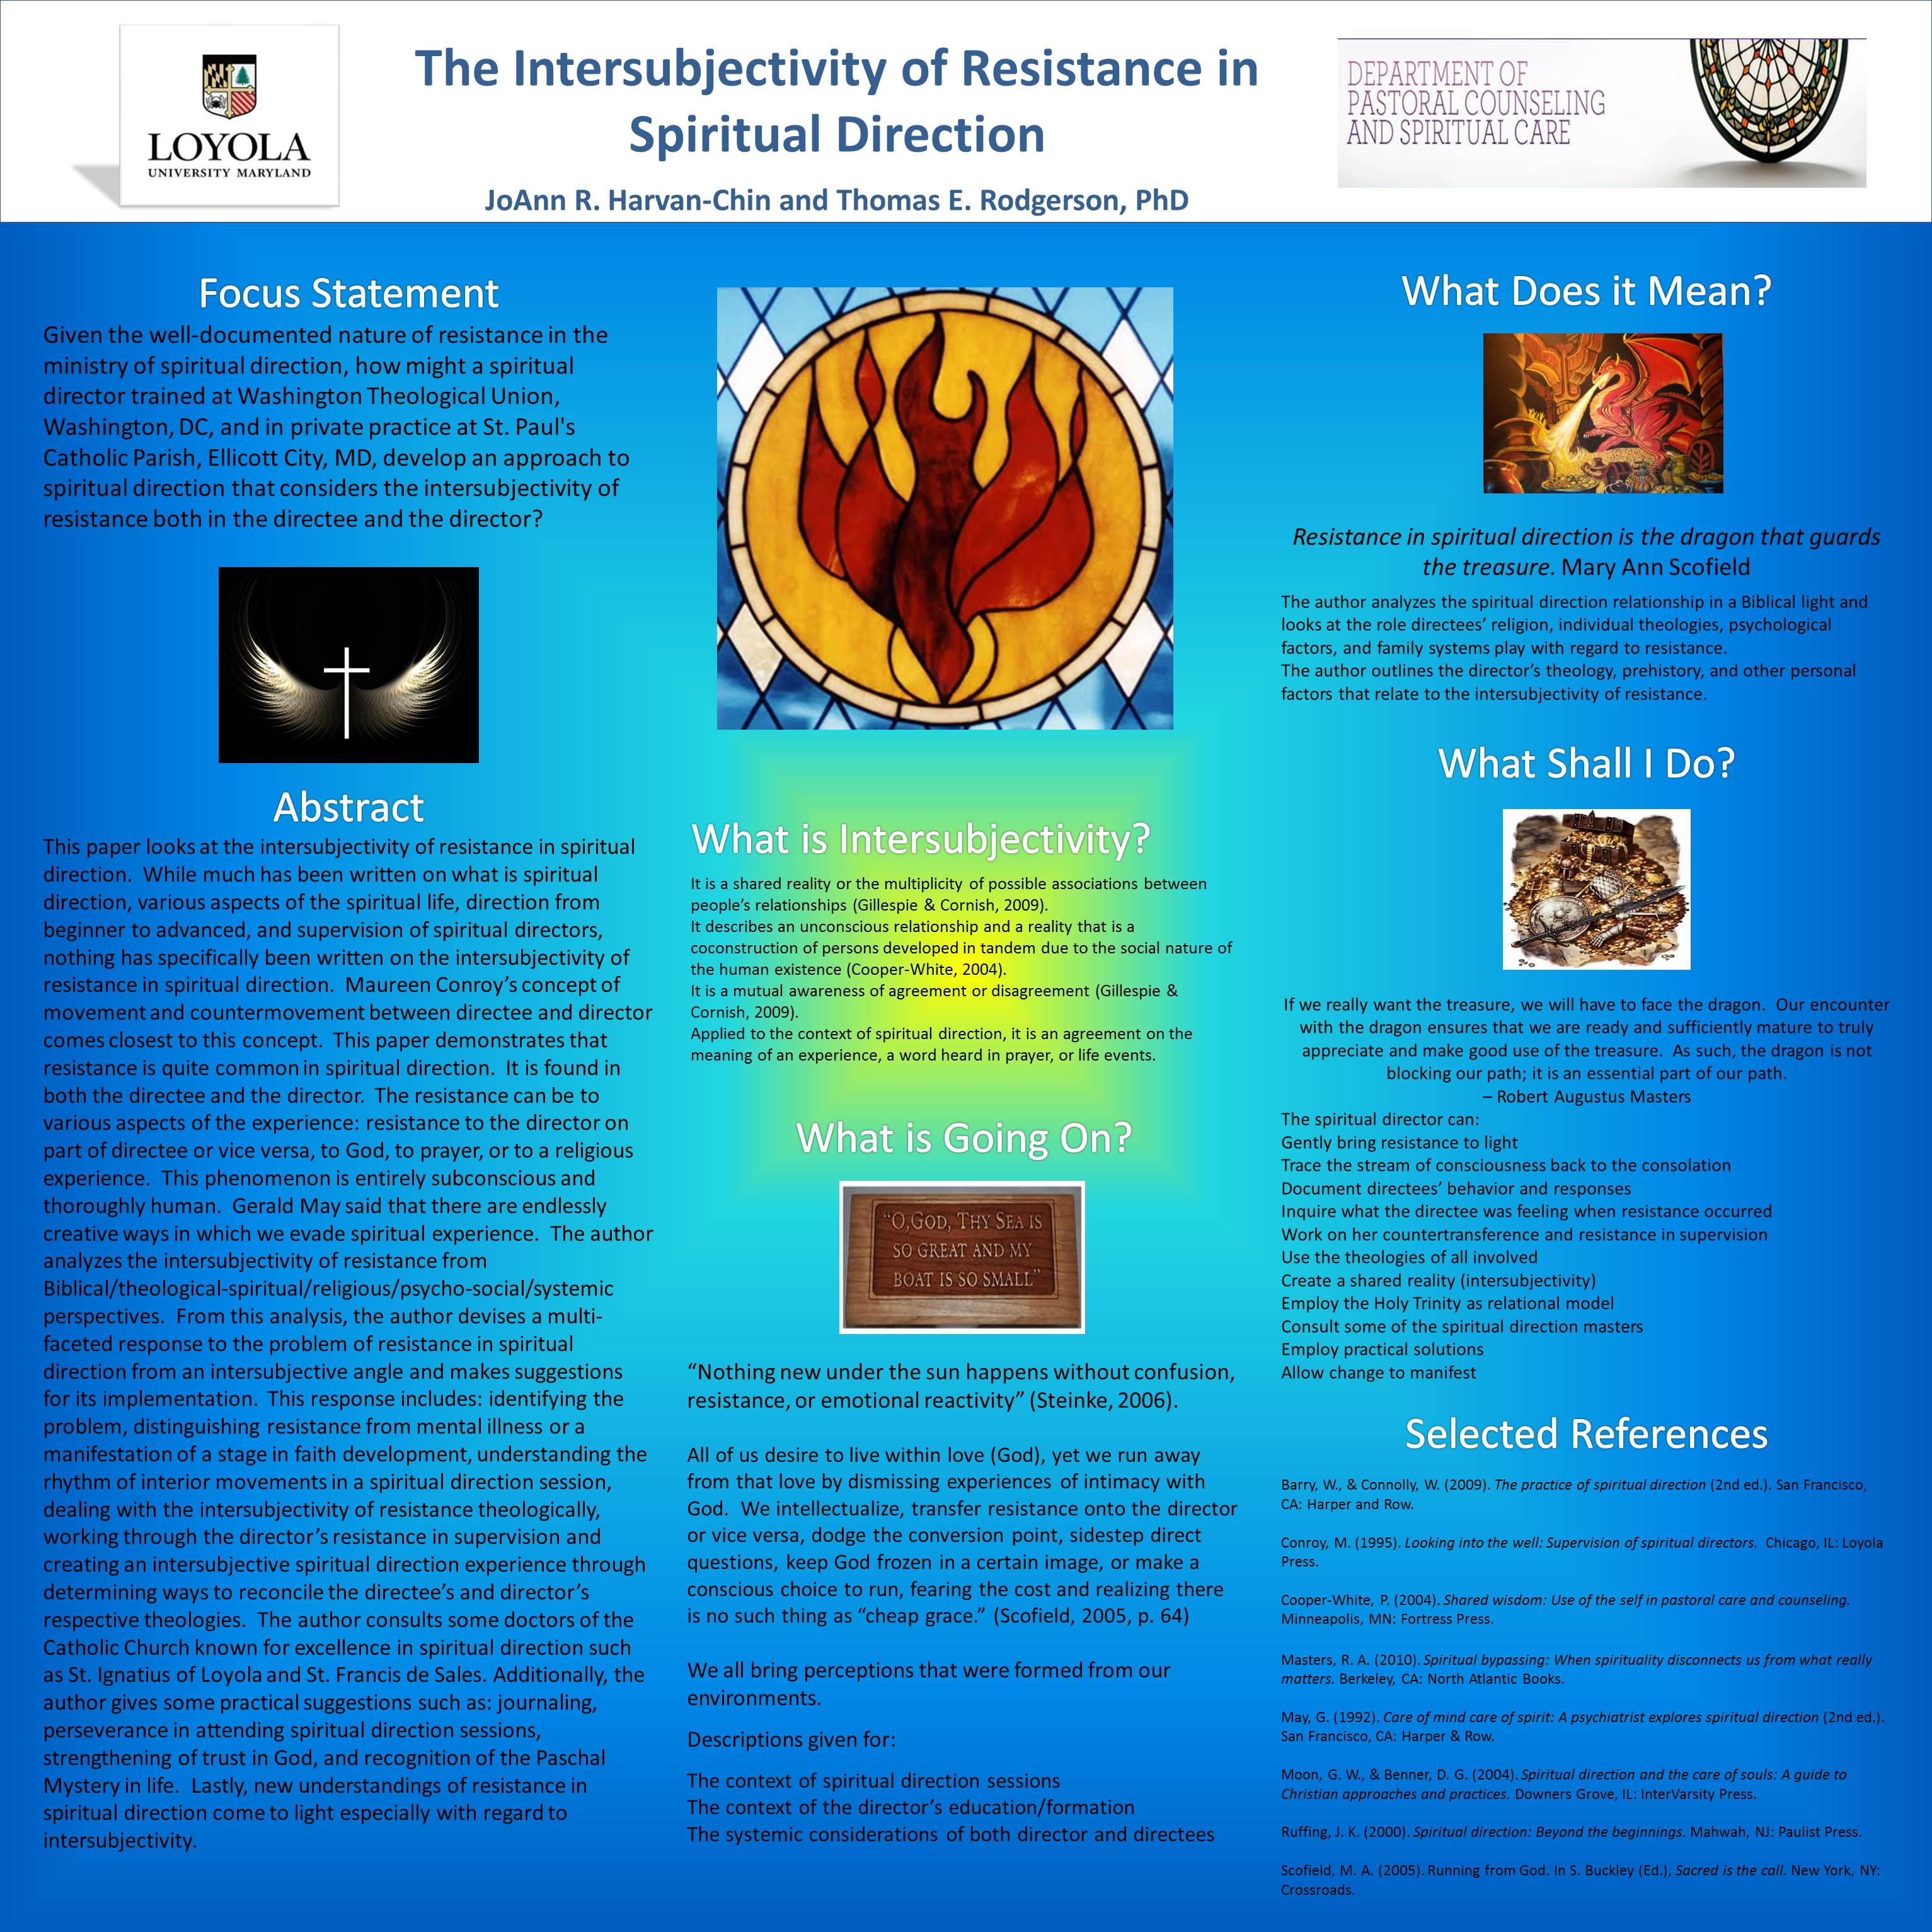 Enlarged poster image: The Intersubjectivity of Resistance in Spiritual Direction